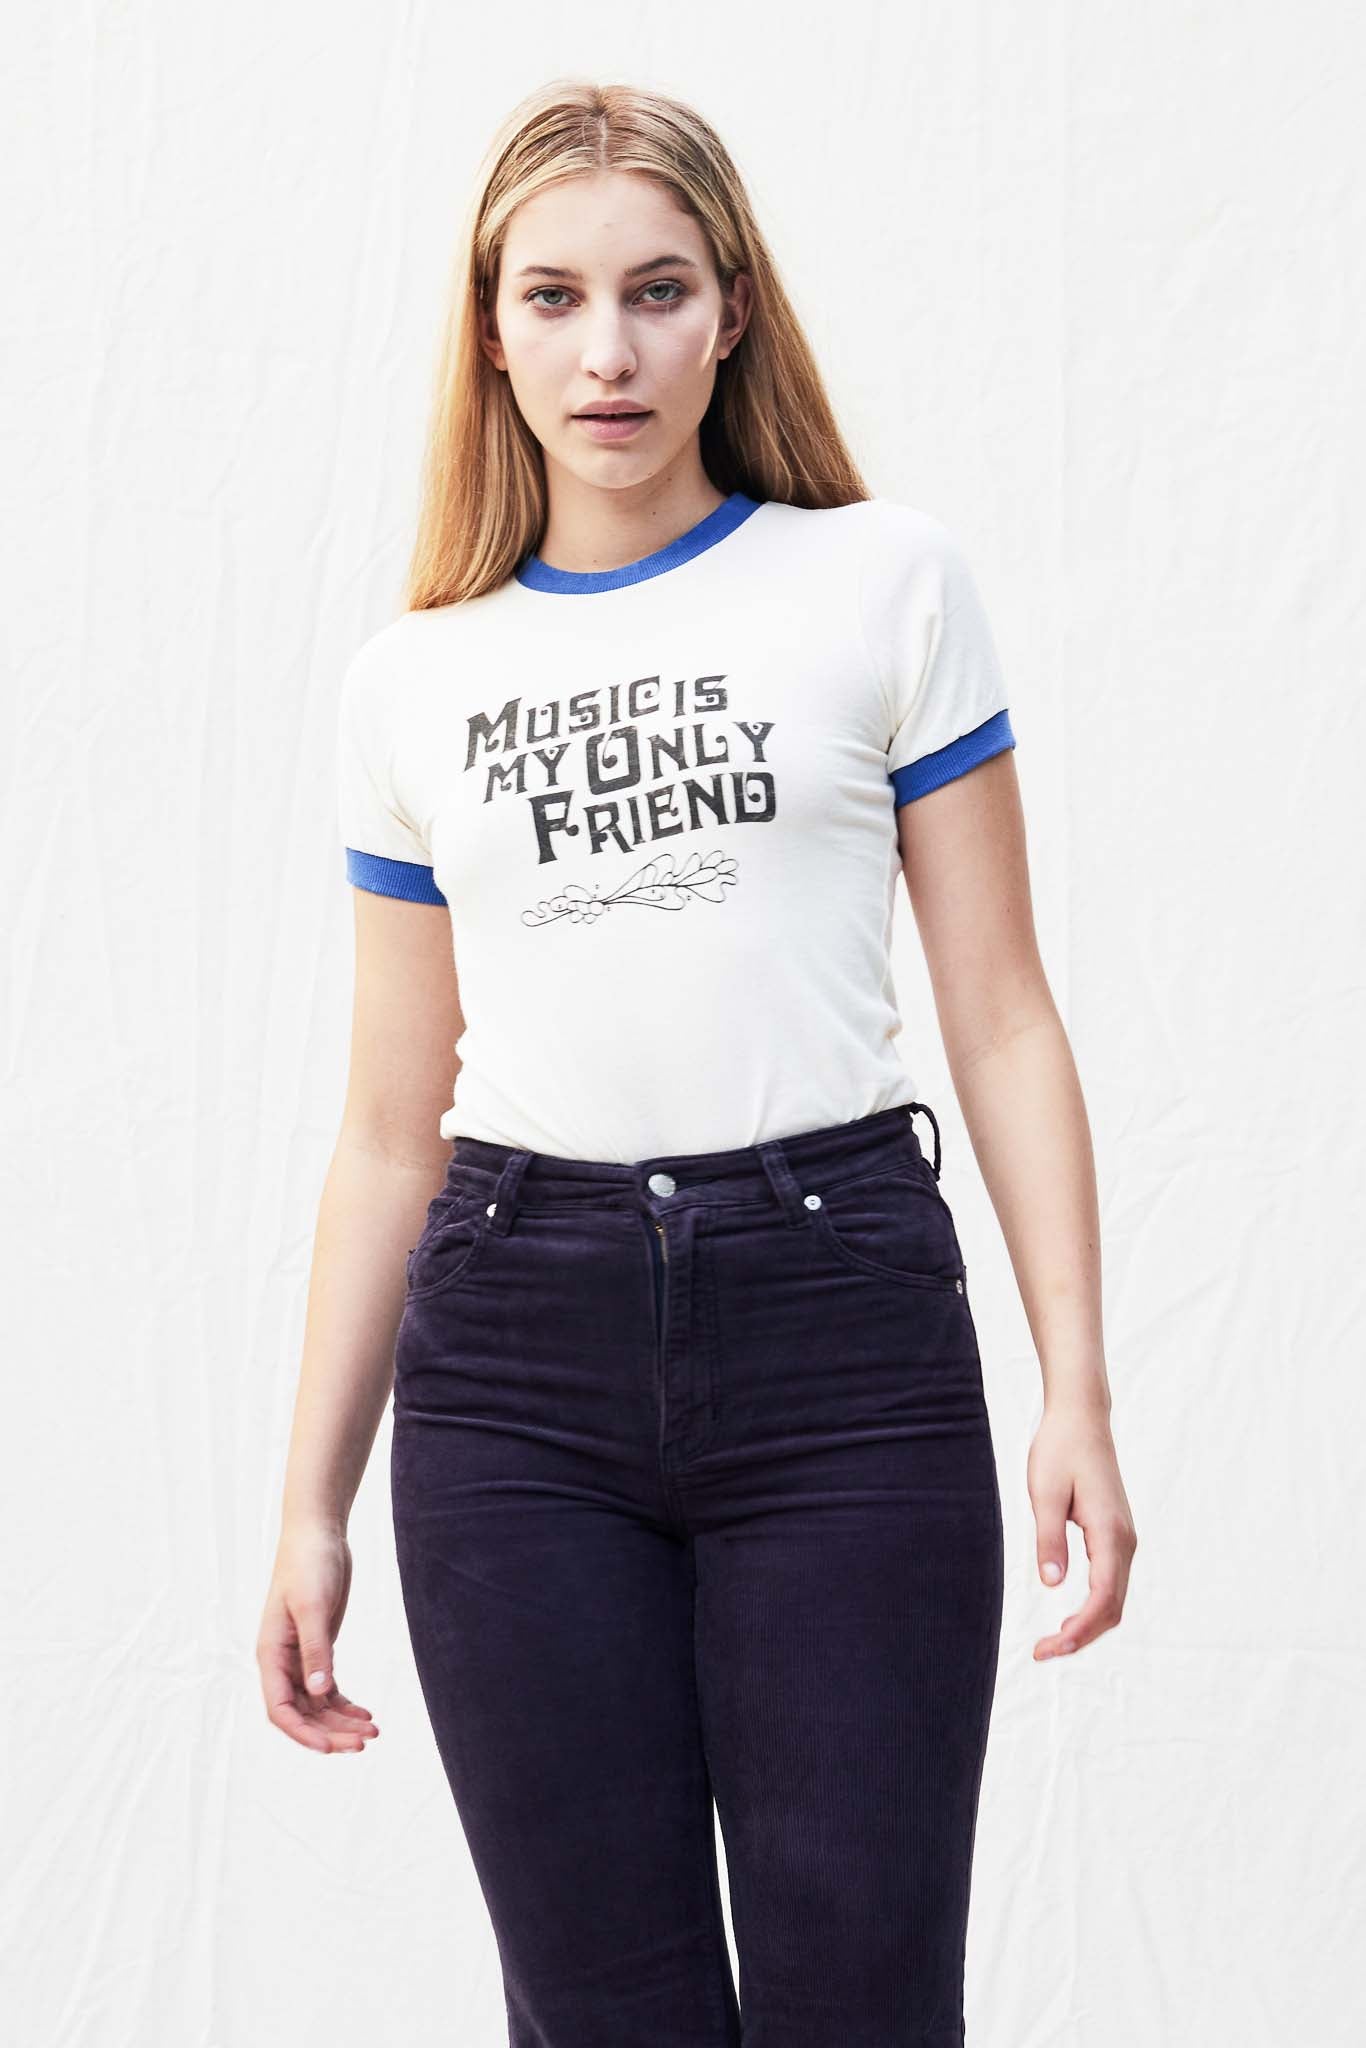 Music Is My Only Friend Tee - The Canyon